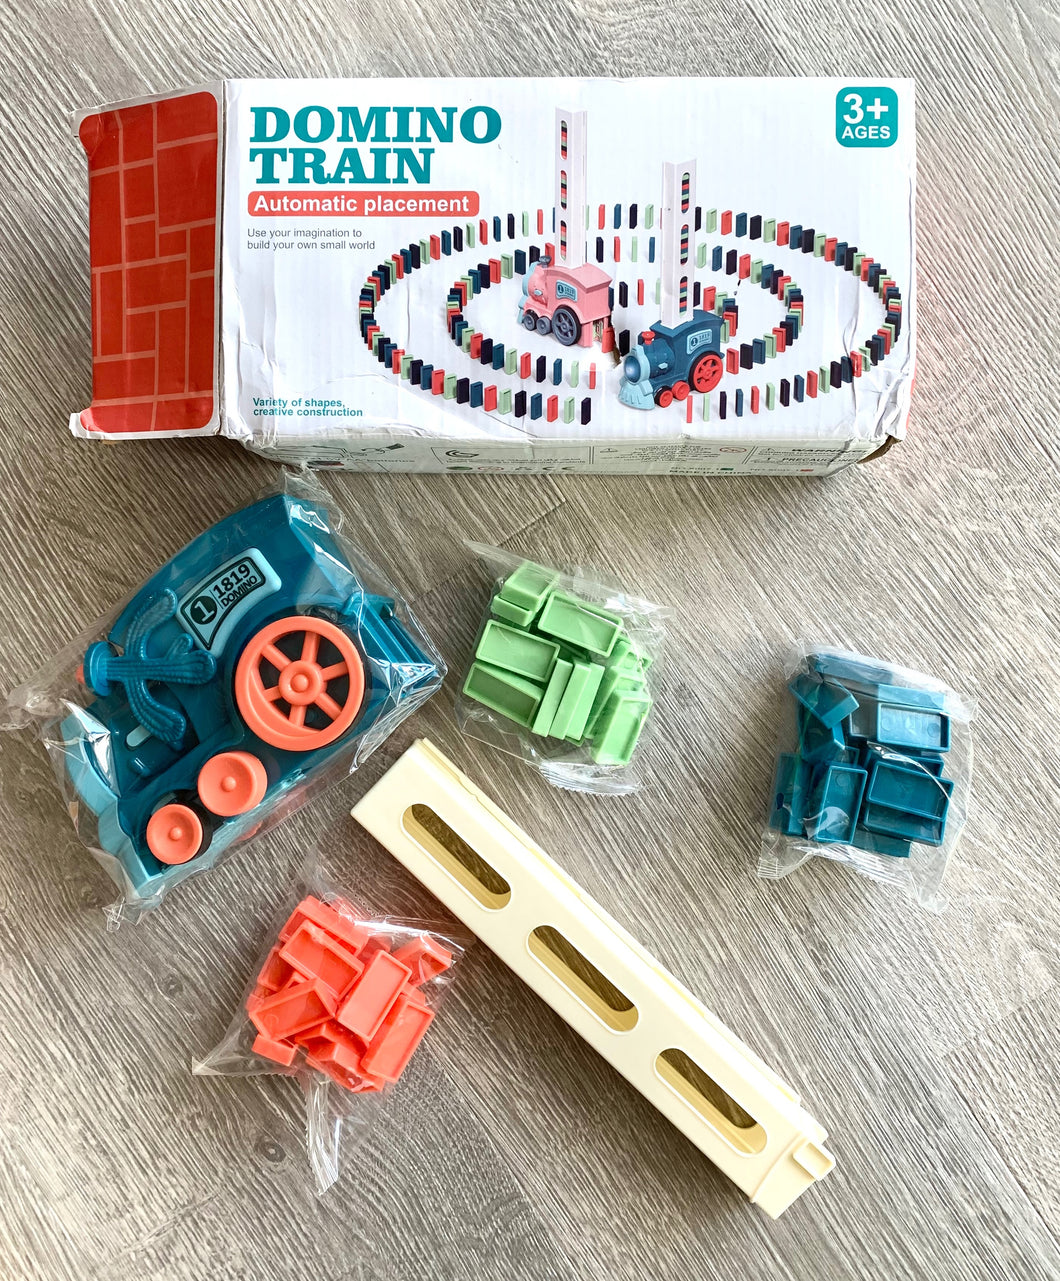 Domino Electric Blue Train Set with Automatic Placement